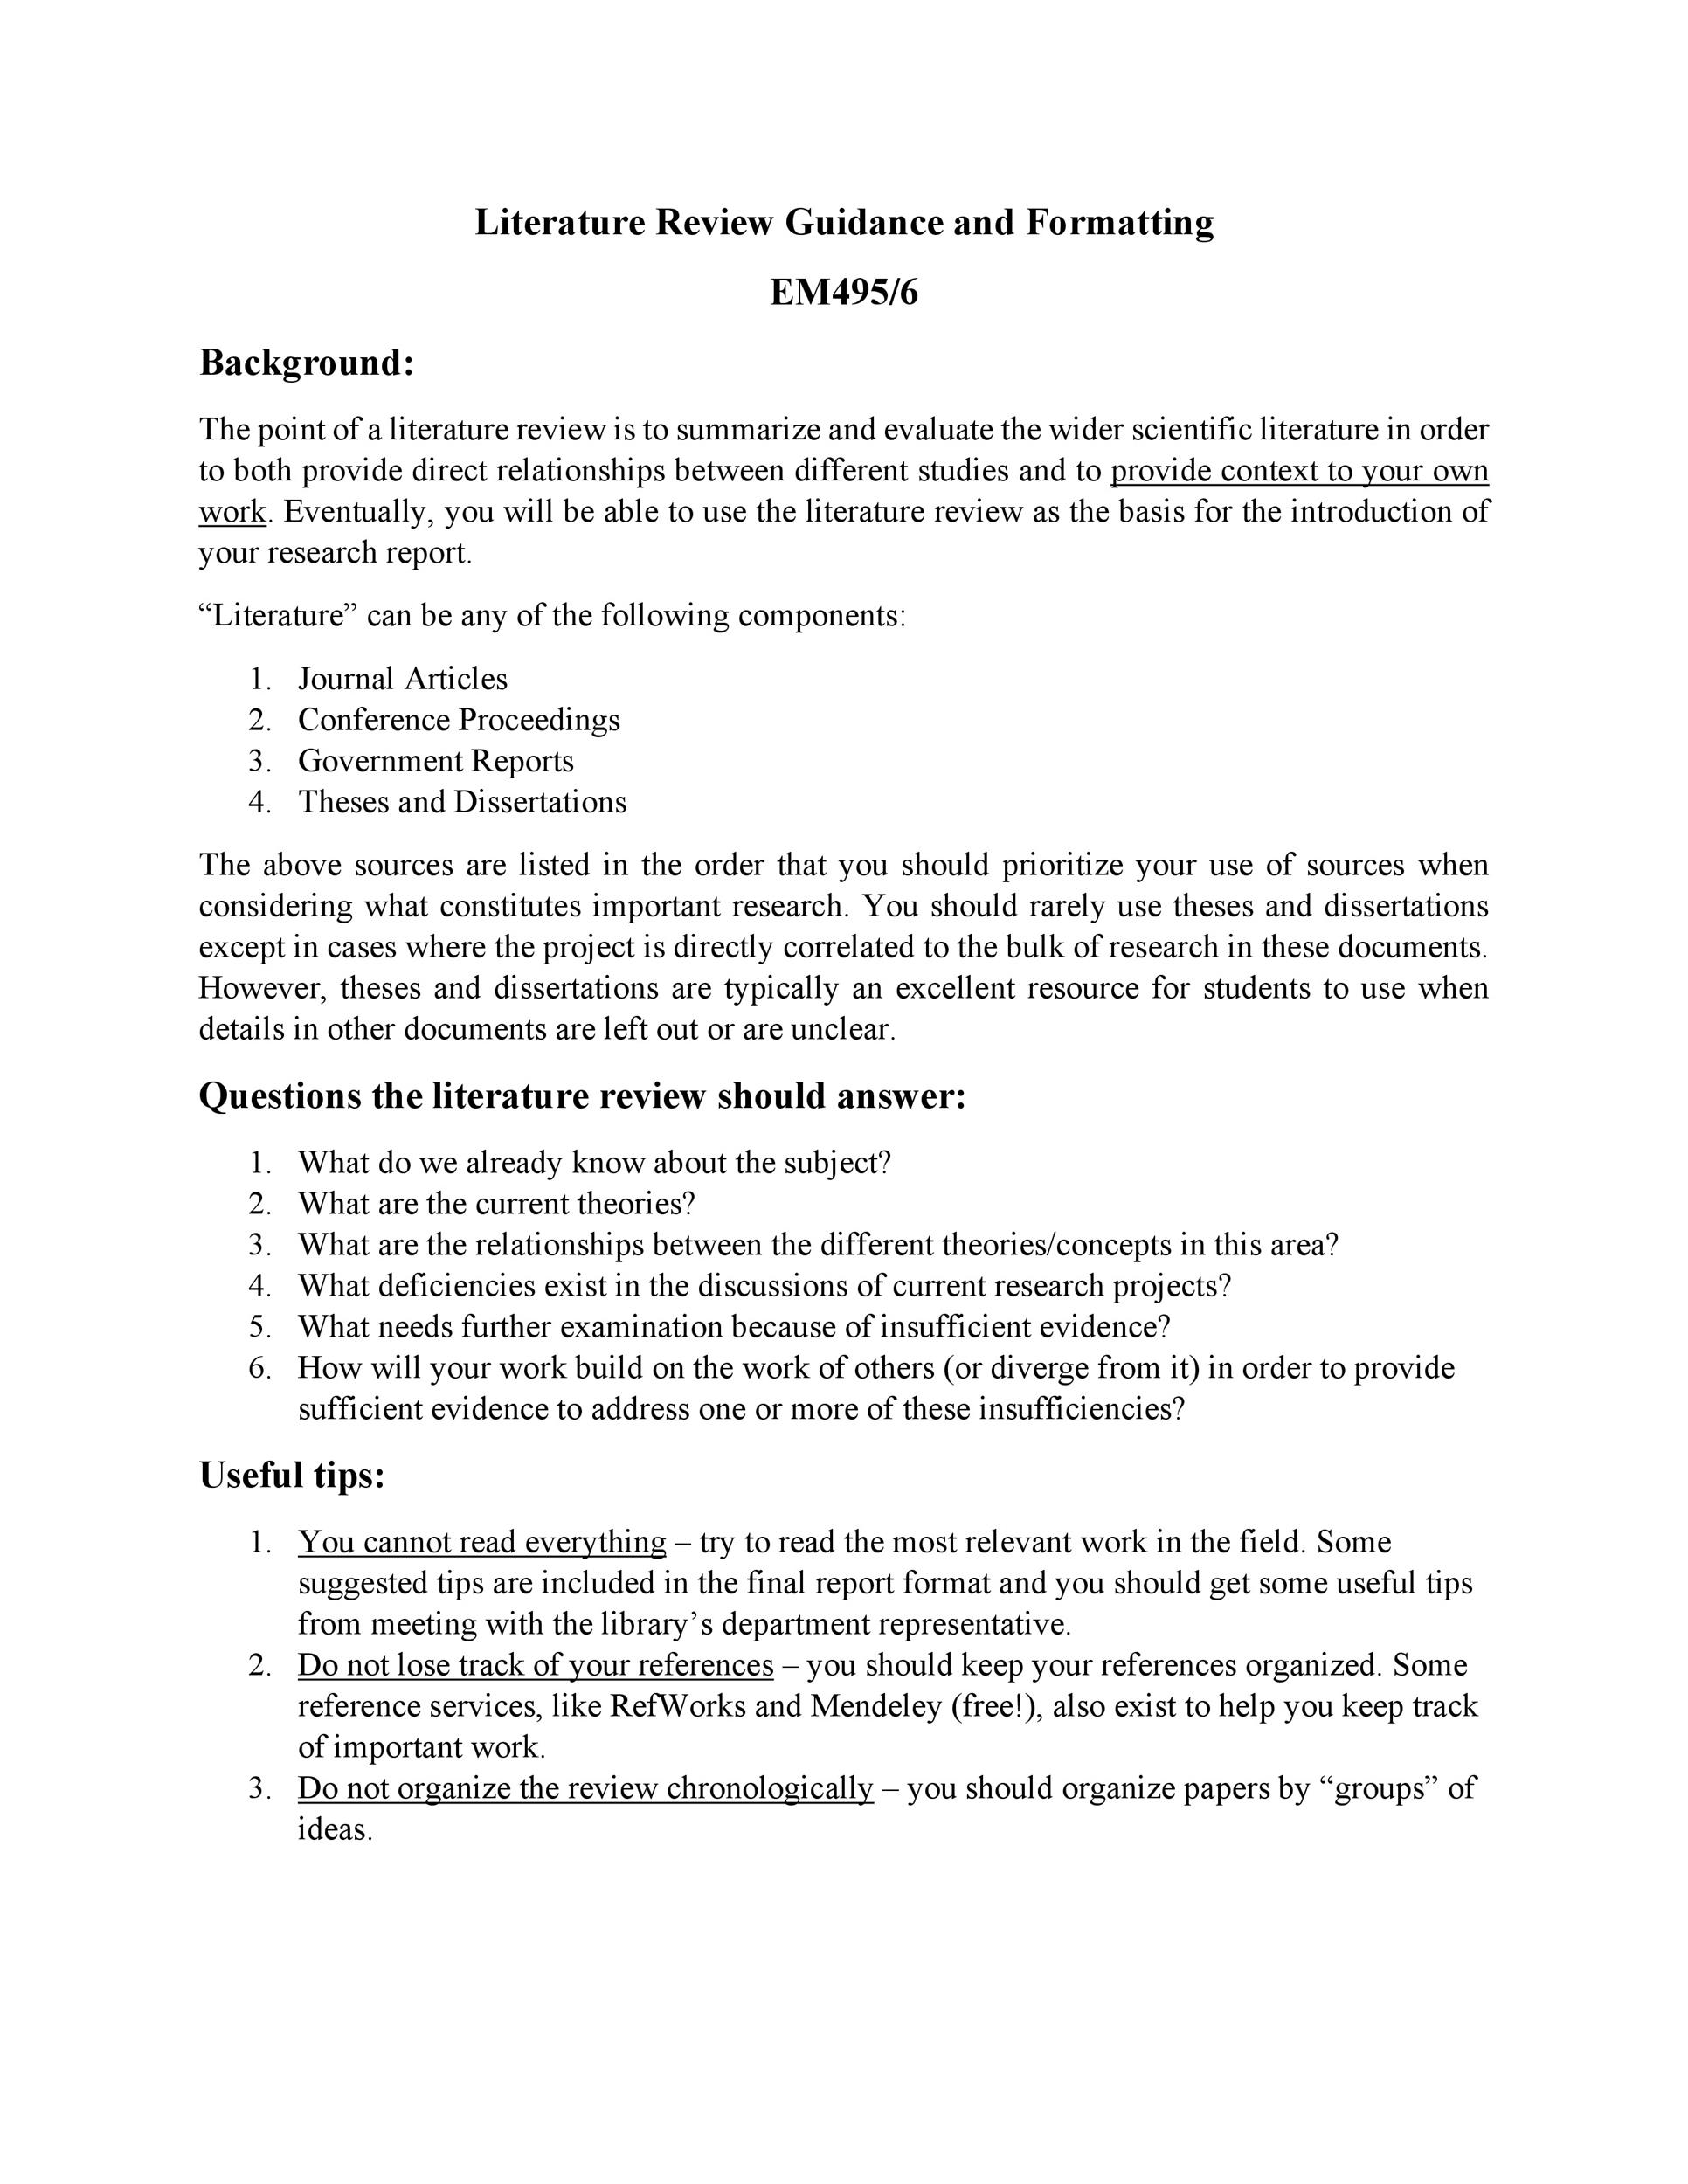 medical literature review example pdf